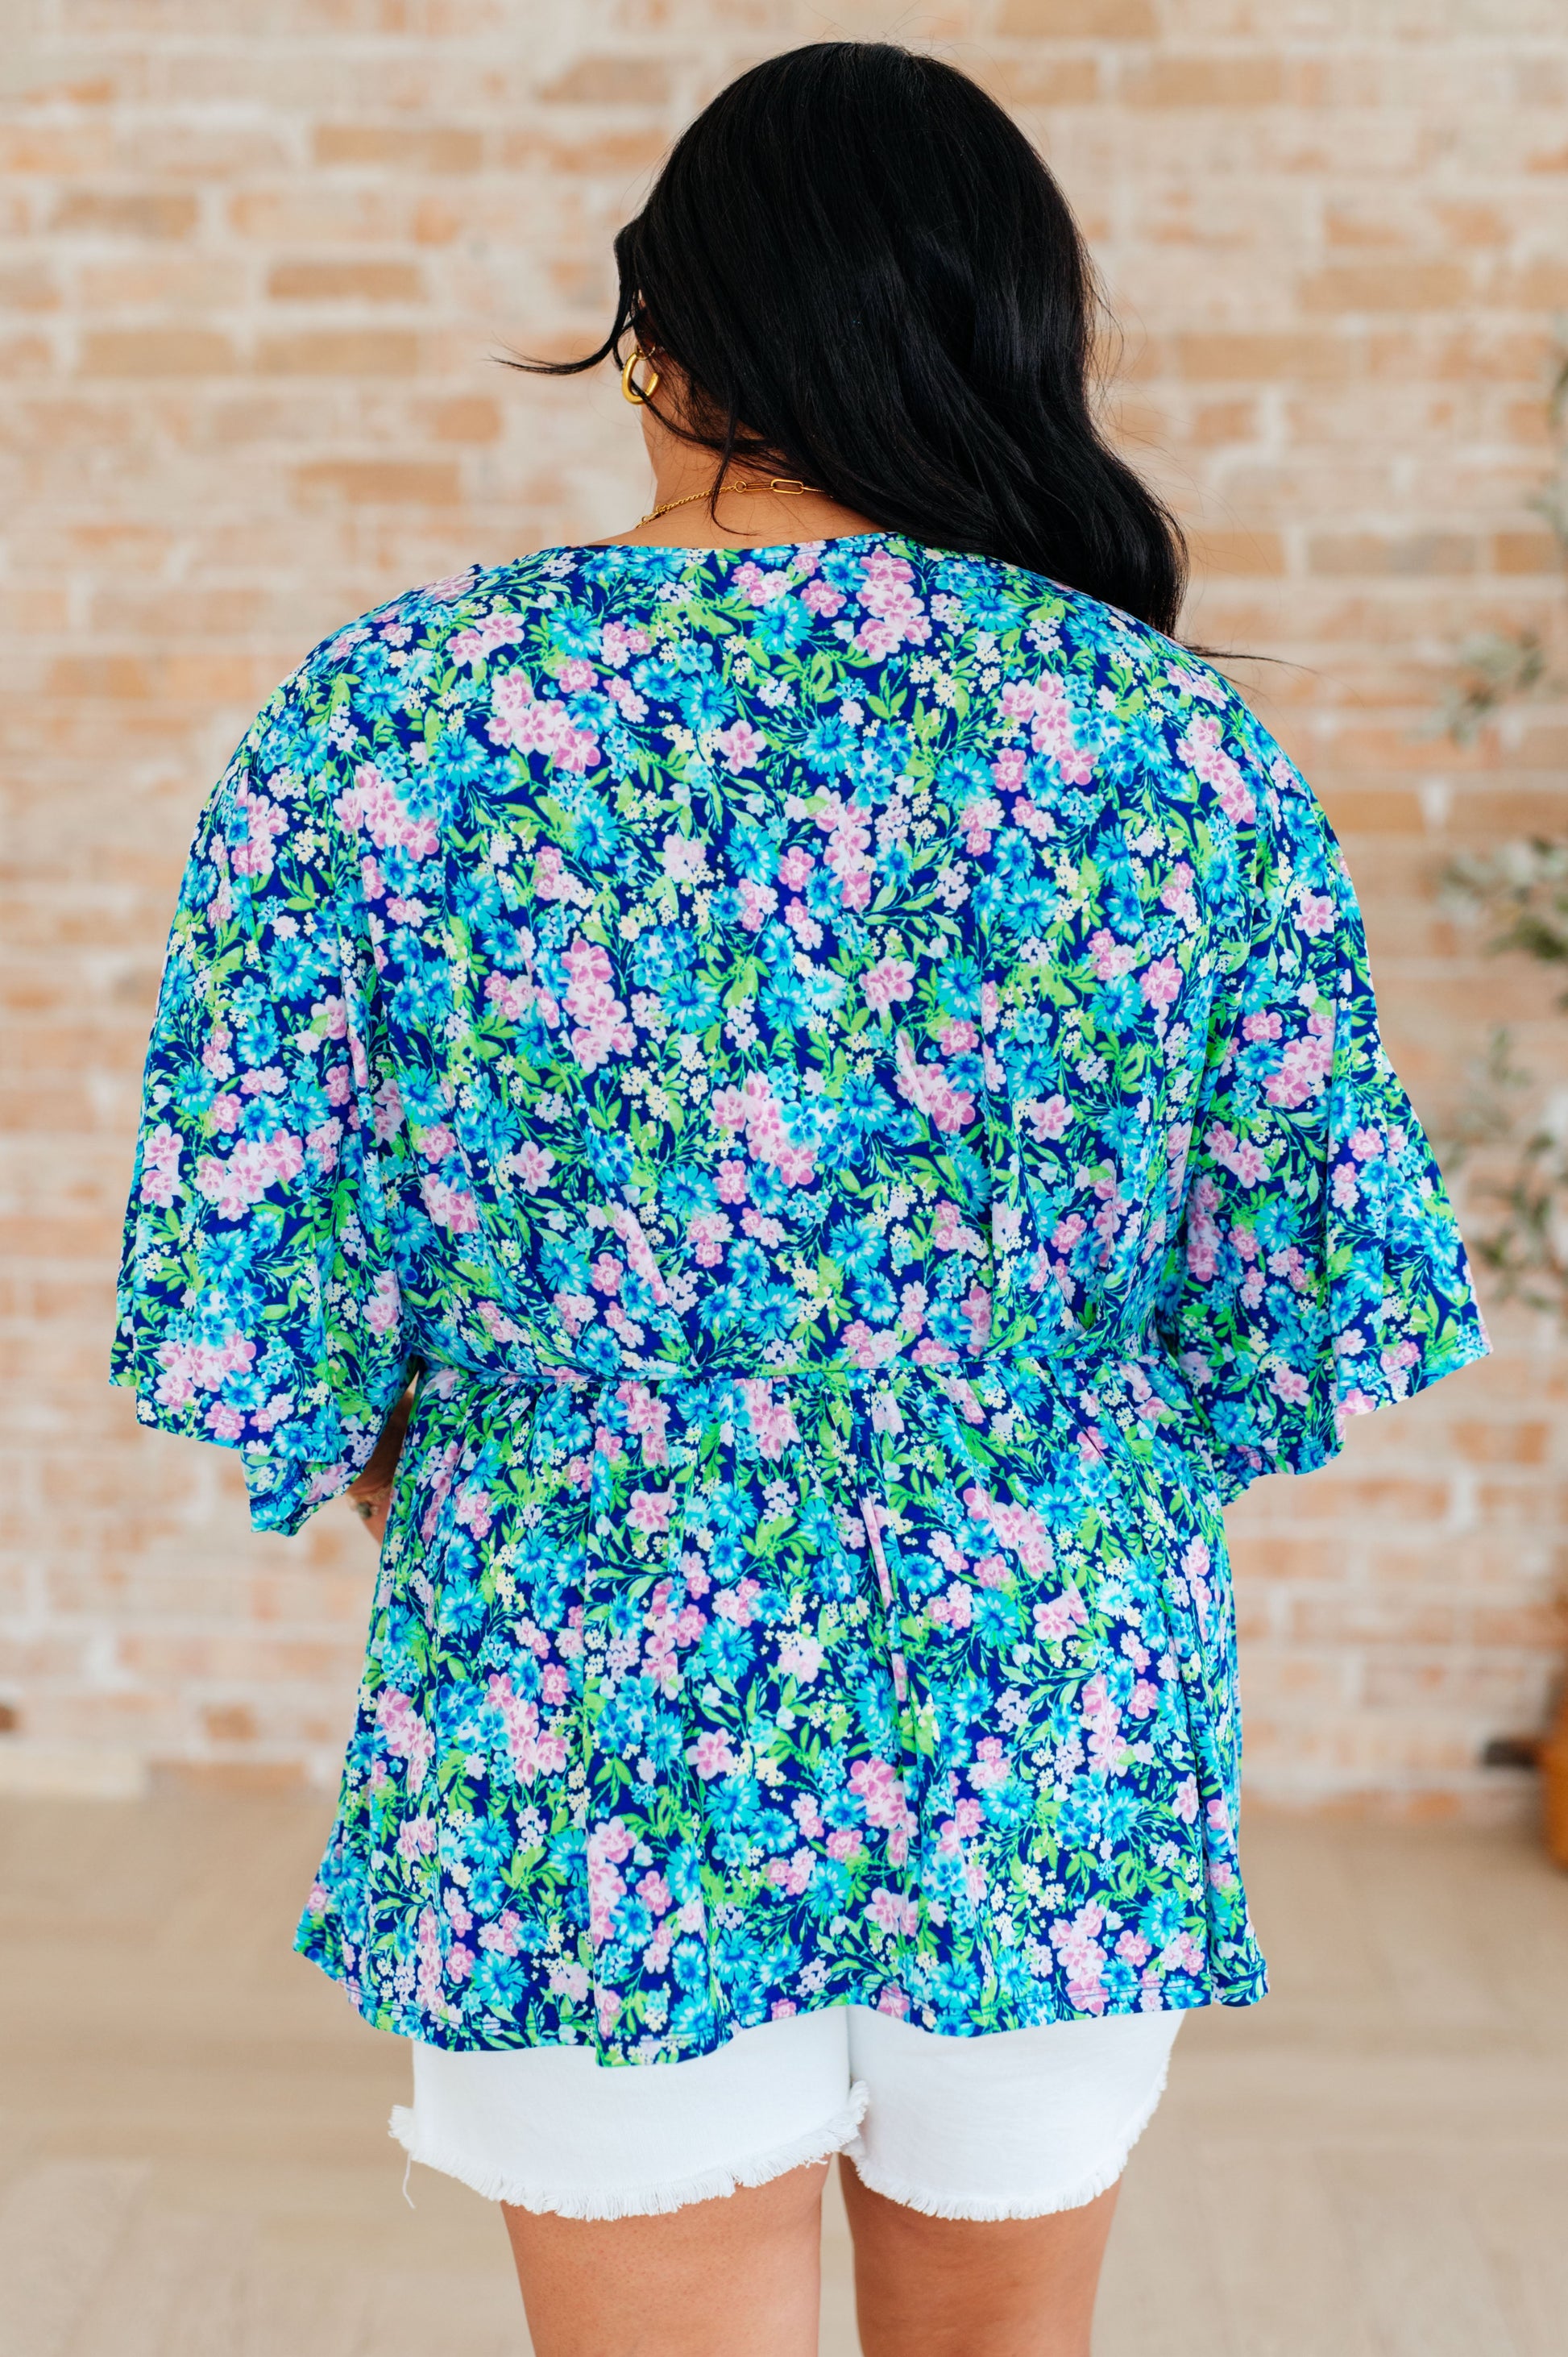 Dreamer Peplum Top in Navy and Mint Floral - Southern Divas Boutique